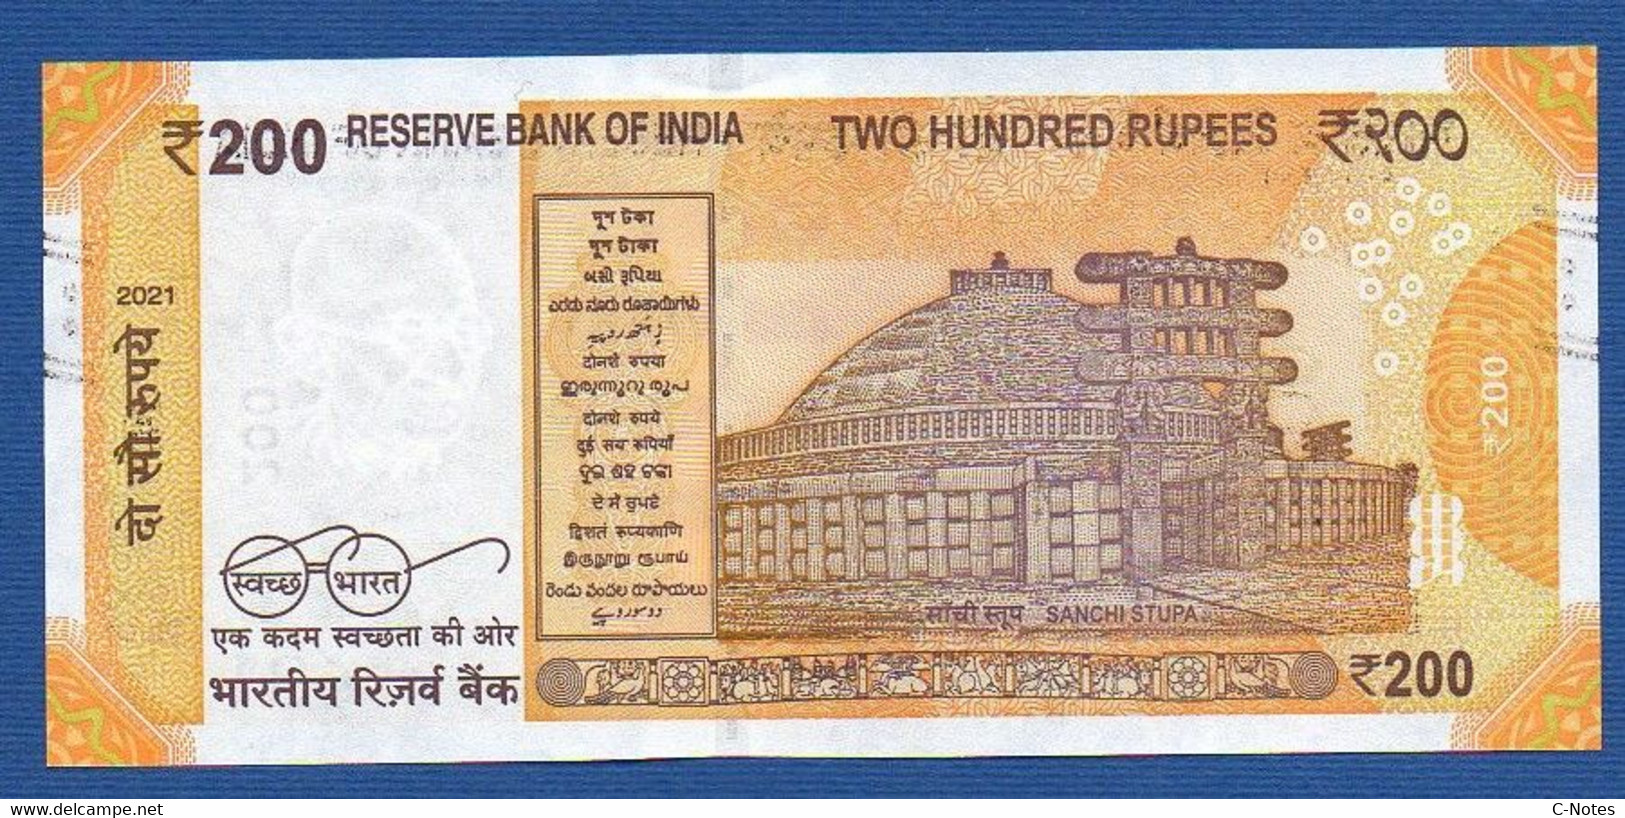 INDIA - P.113* –  200 Rupees 2021 UNC Plate Letter F,  Serie 3AA 74563* - India